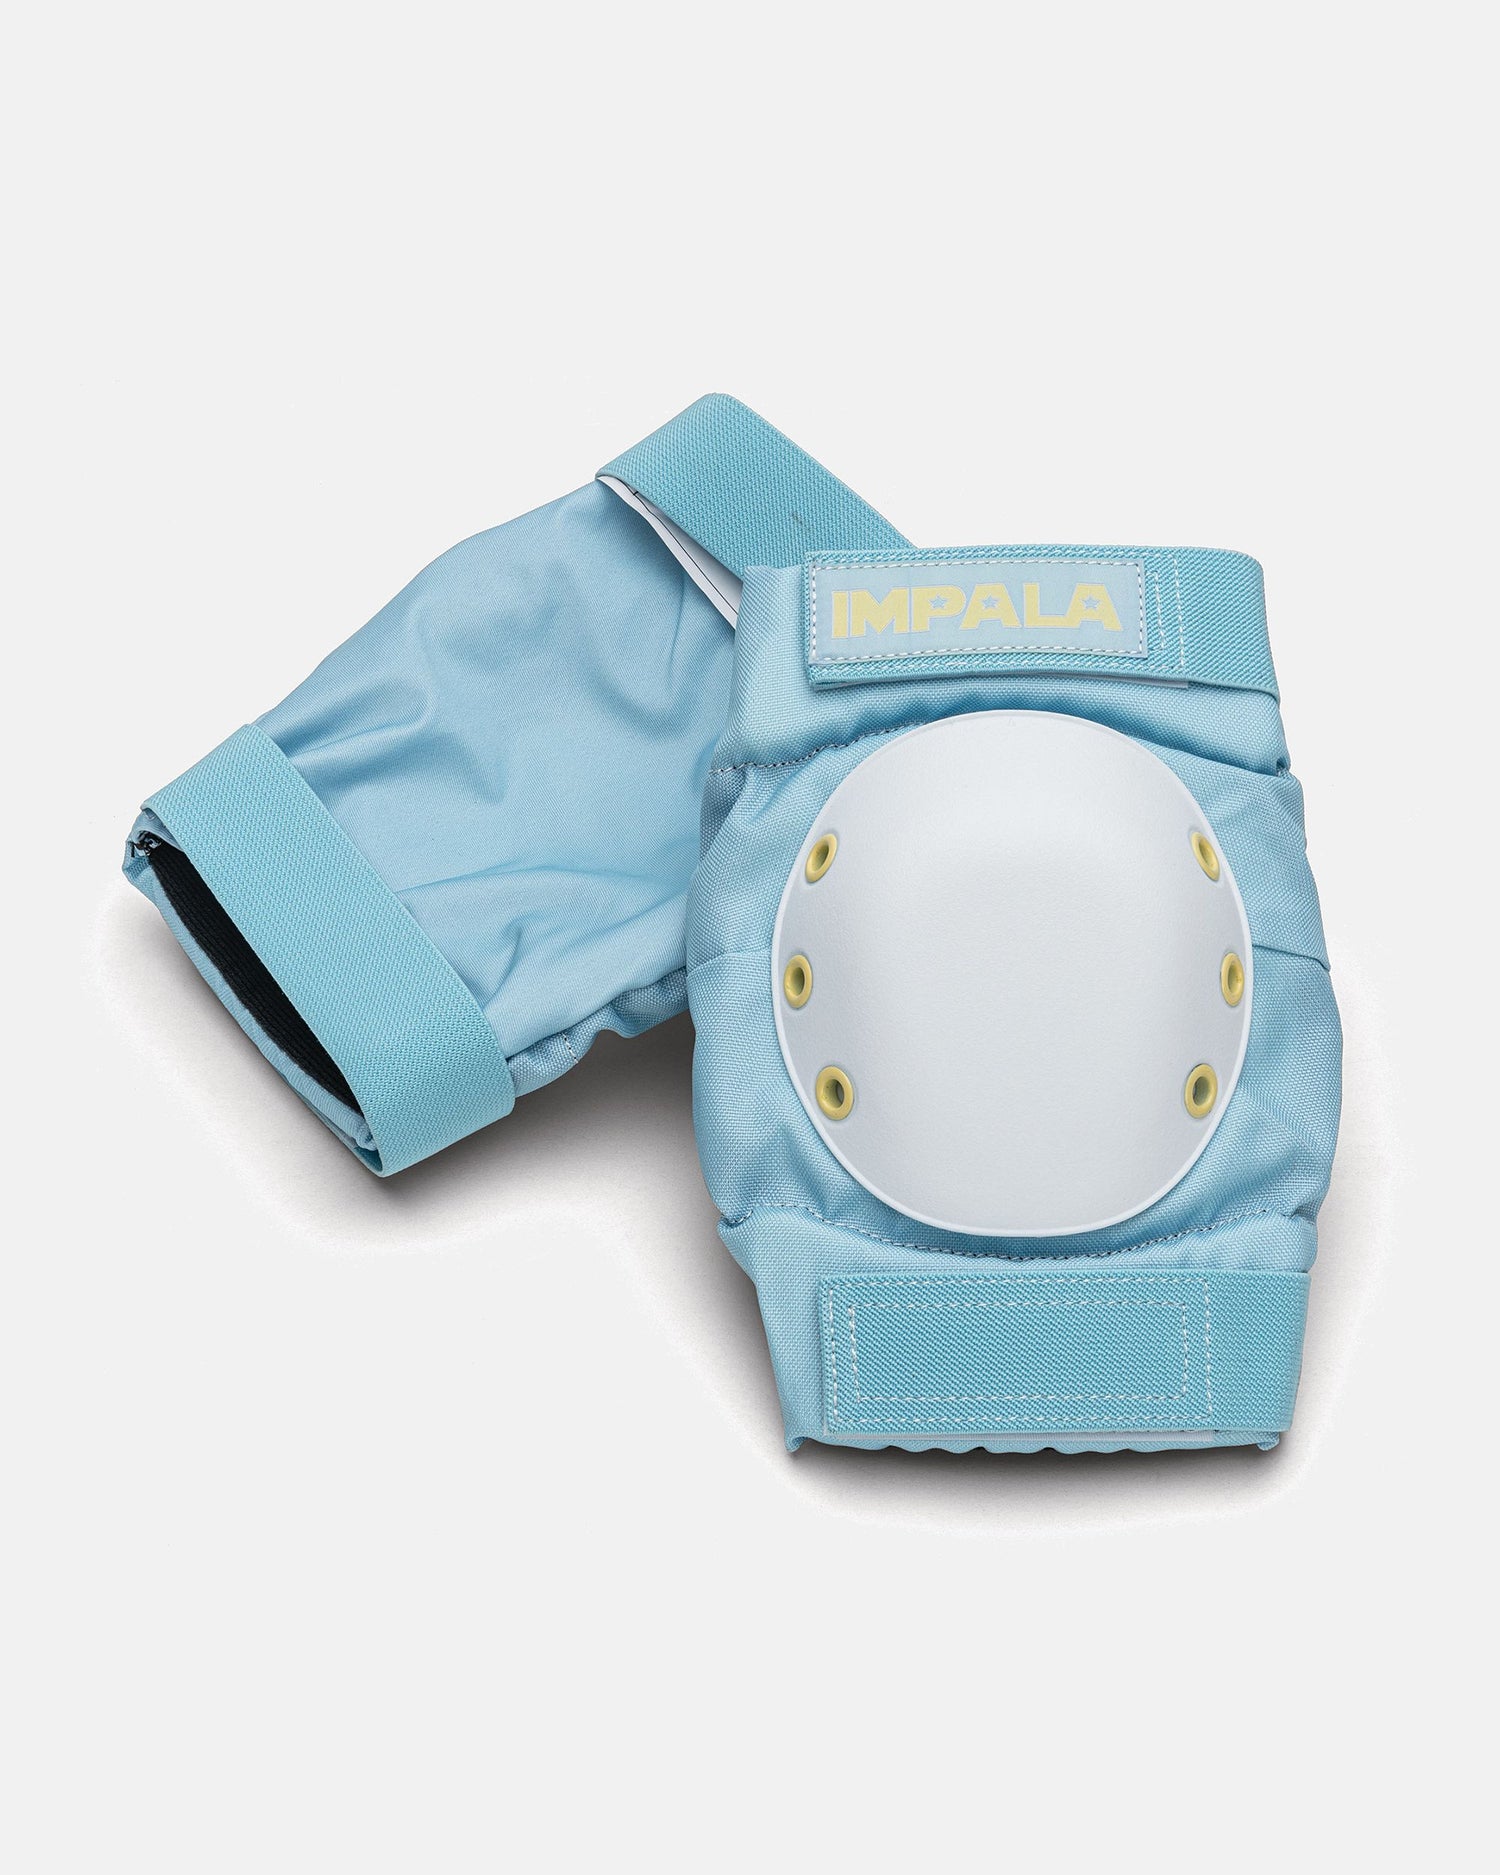 Knee pads in the Impala Protective Set - Sky Blue/Yellow